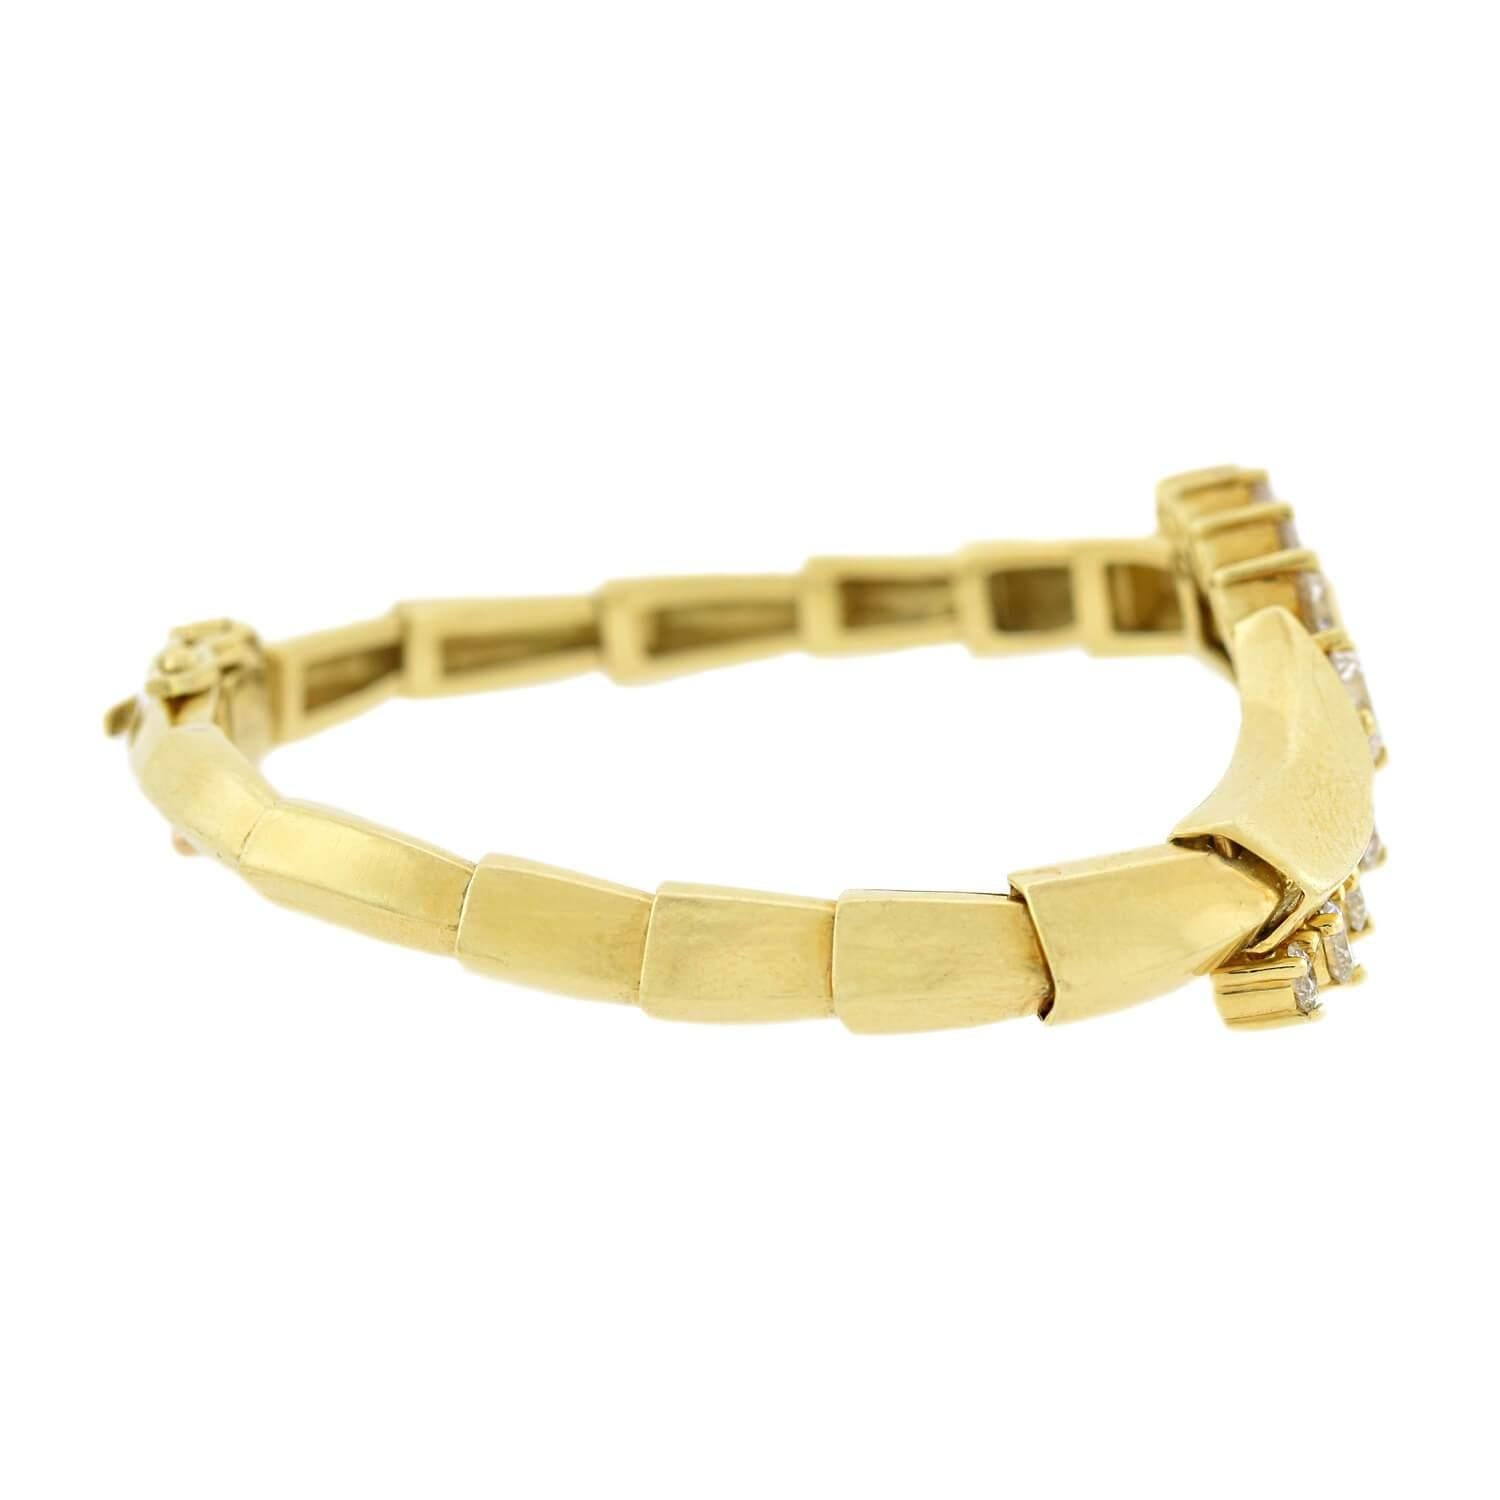 A fabulous contemporary diamond bracelet by acclaimed jewelry designer Jose Hess! Crafted in vibrant 18kt yellow gold, this bracelet stars nine sparkling Modern Brilliant Cut diamonds which curve along the front of a bypass-style design.